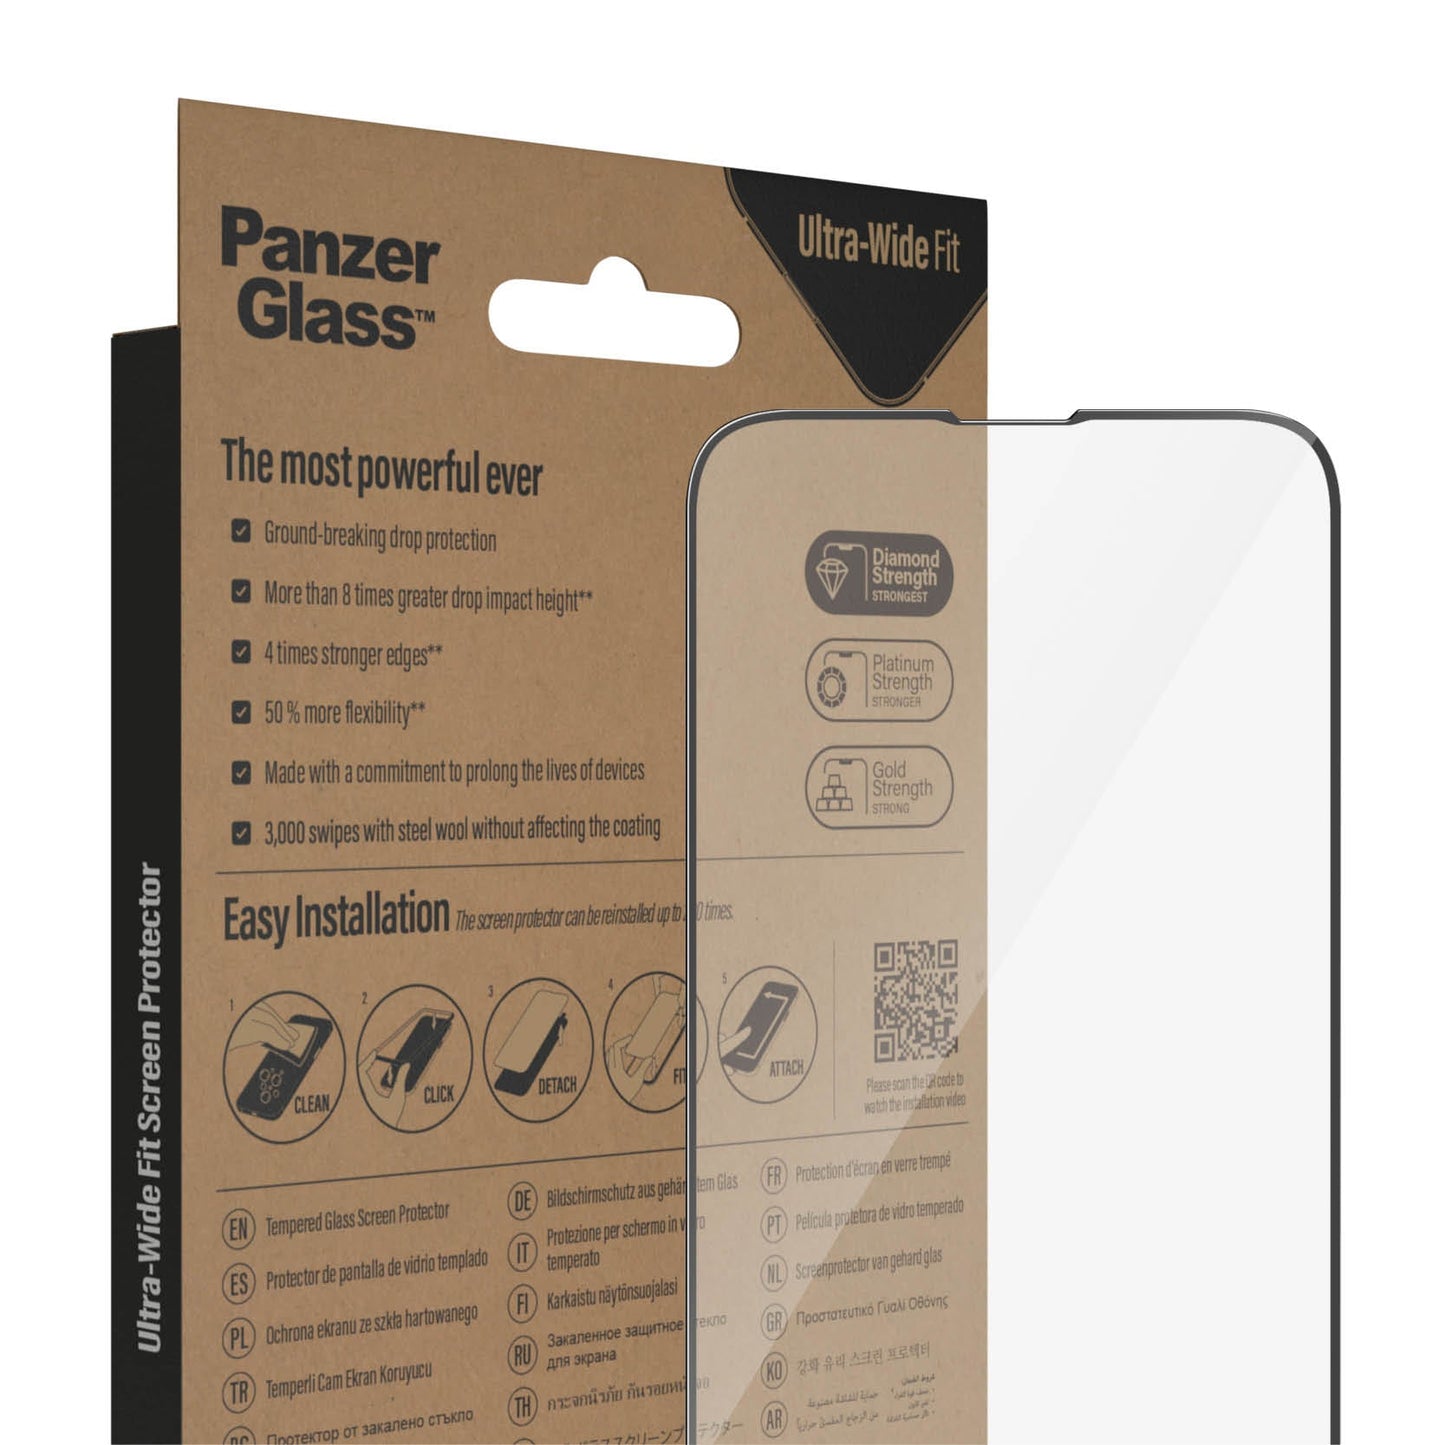 PanzerGlass™ Ultra-Wide Fit Screen Protector for iPhone 14, iPhone 13/13 Pro - Clear